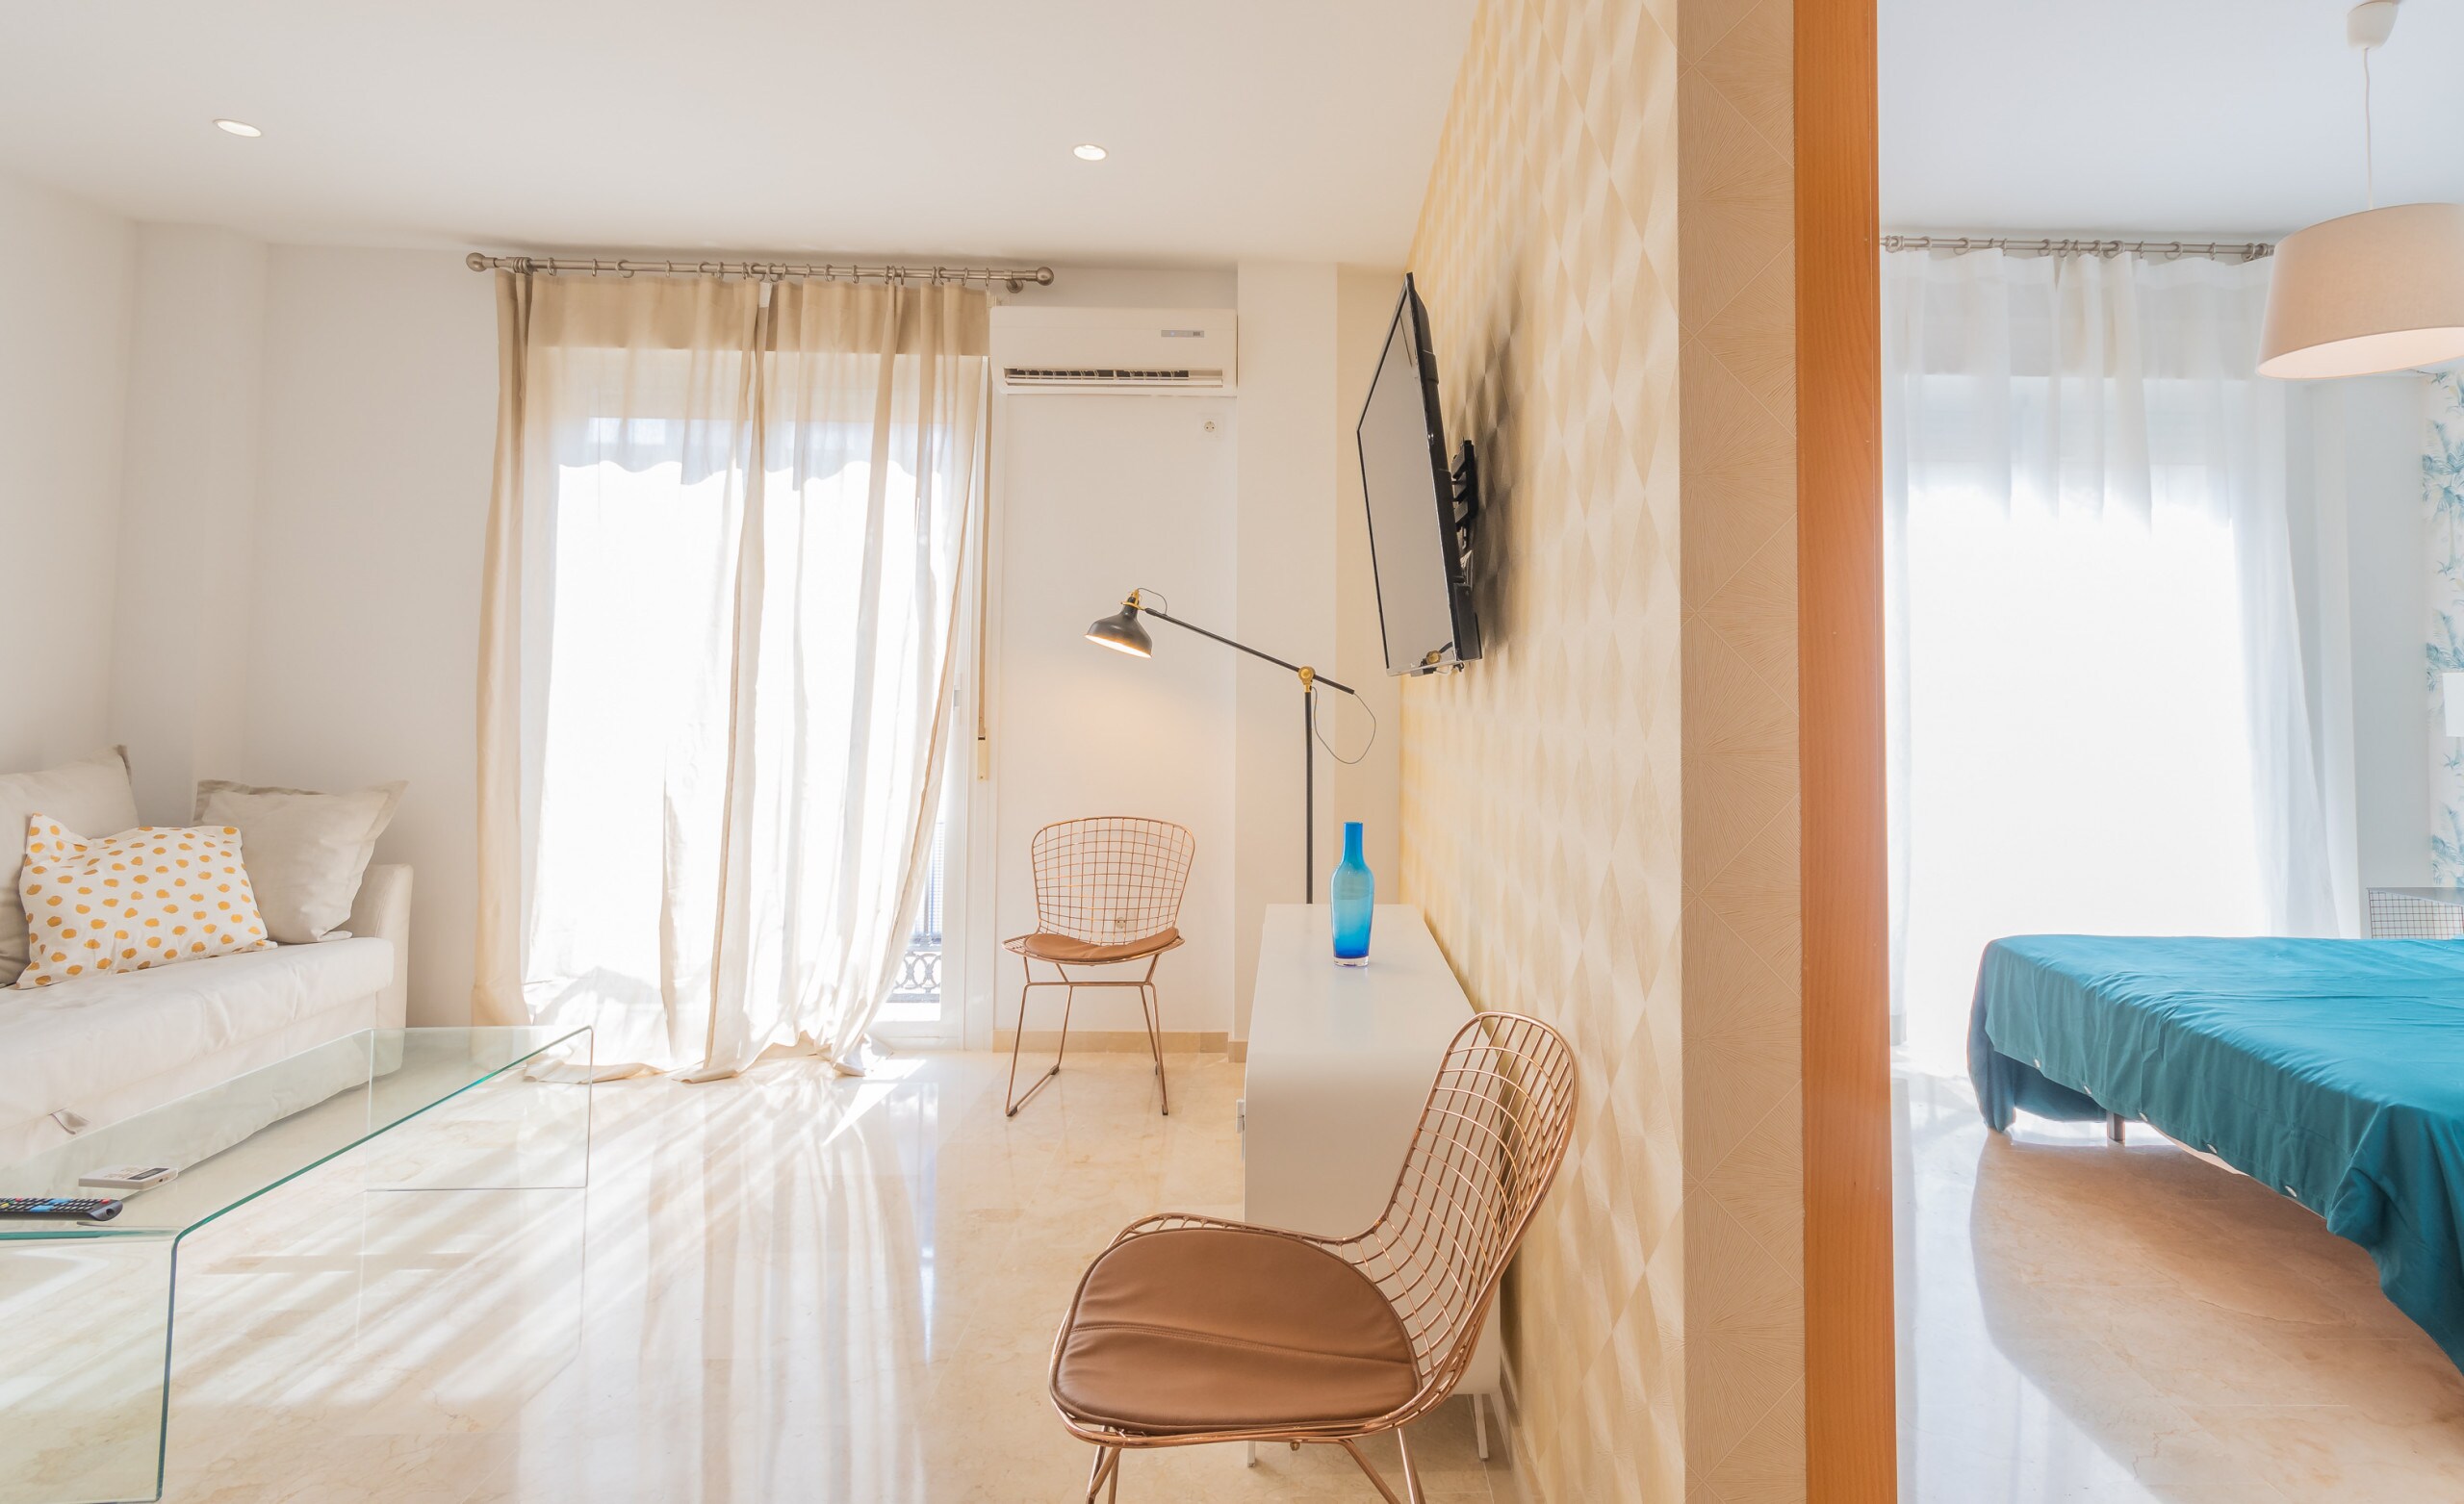 Enjoy the living room of this apartment in the center of Malaga